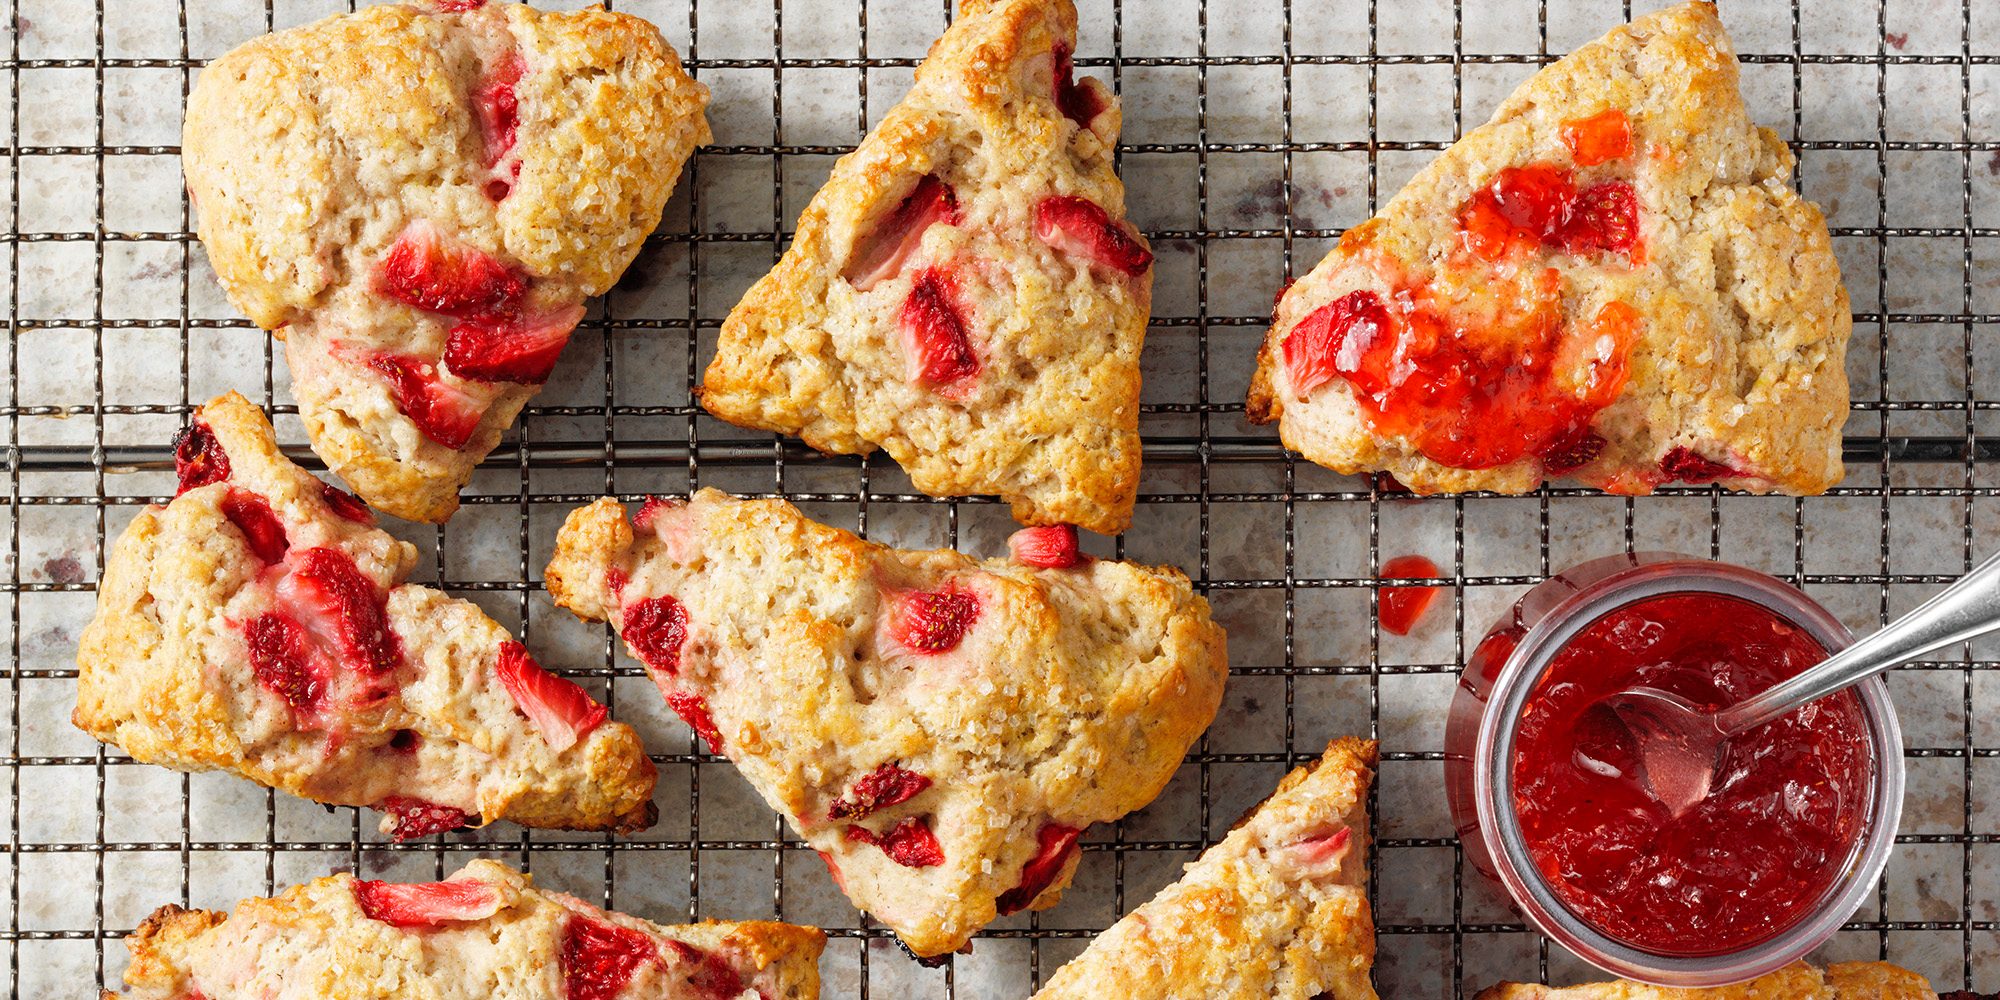 Strawberry scones on a wire rack